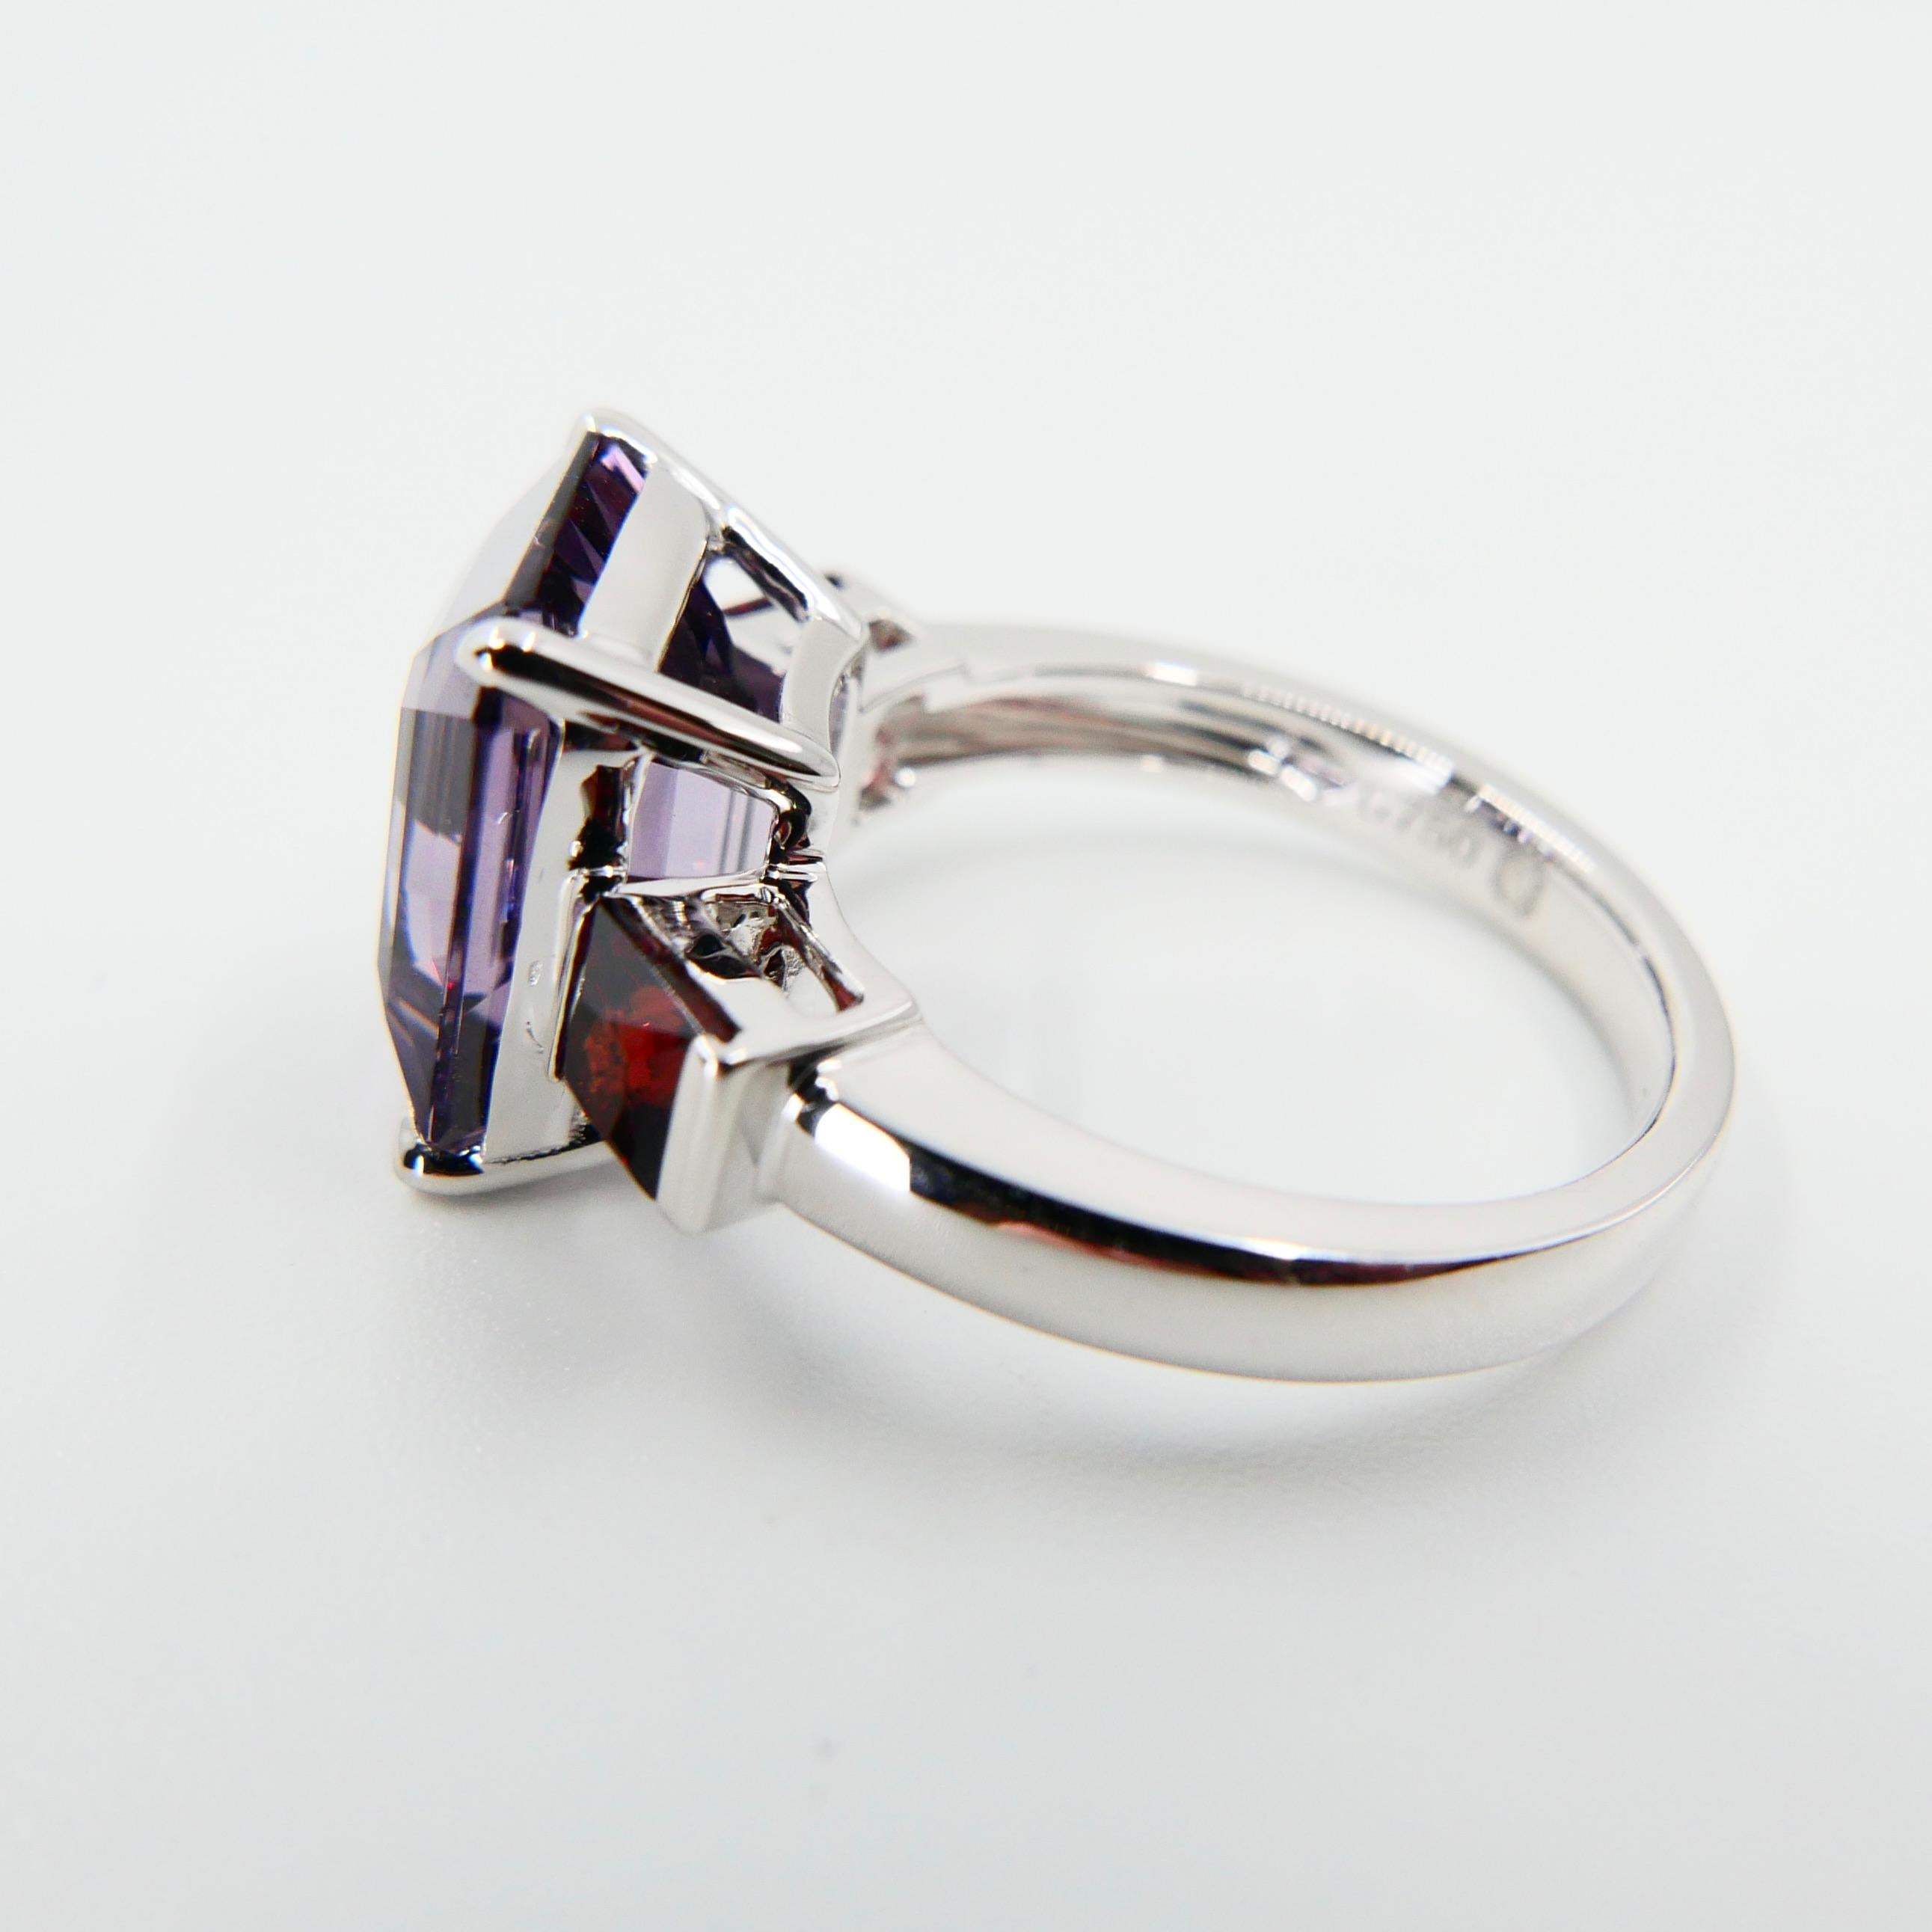 Women's Natural 7.77 Cts Purple Spinel & 0.83 Carat Red Spinel Three-Stone Cocktail Ring